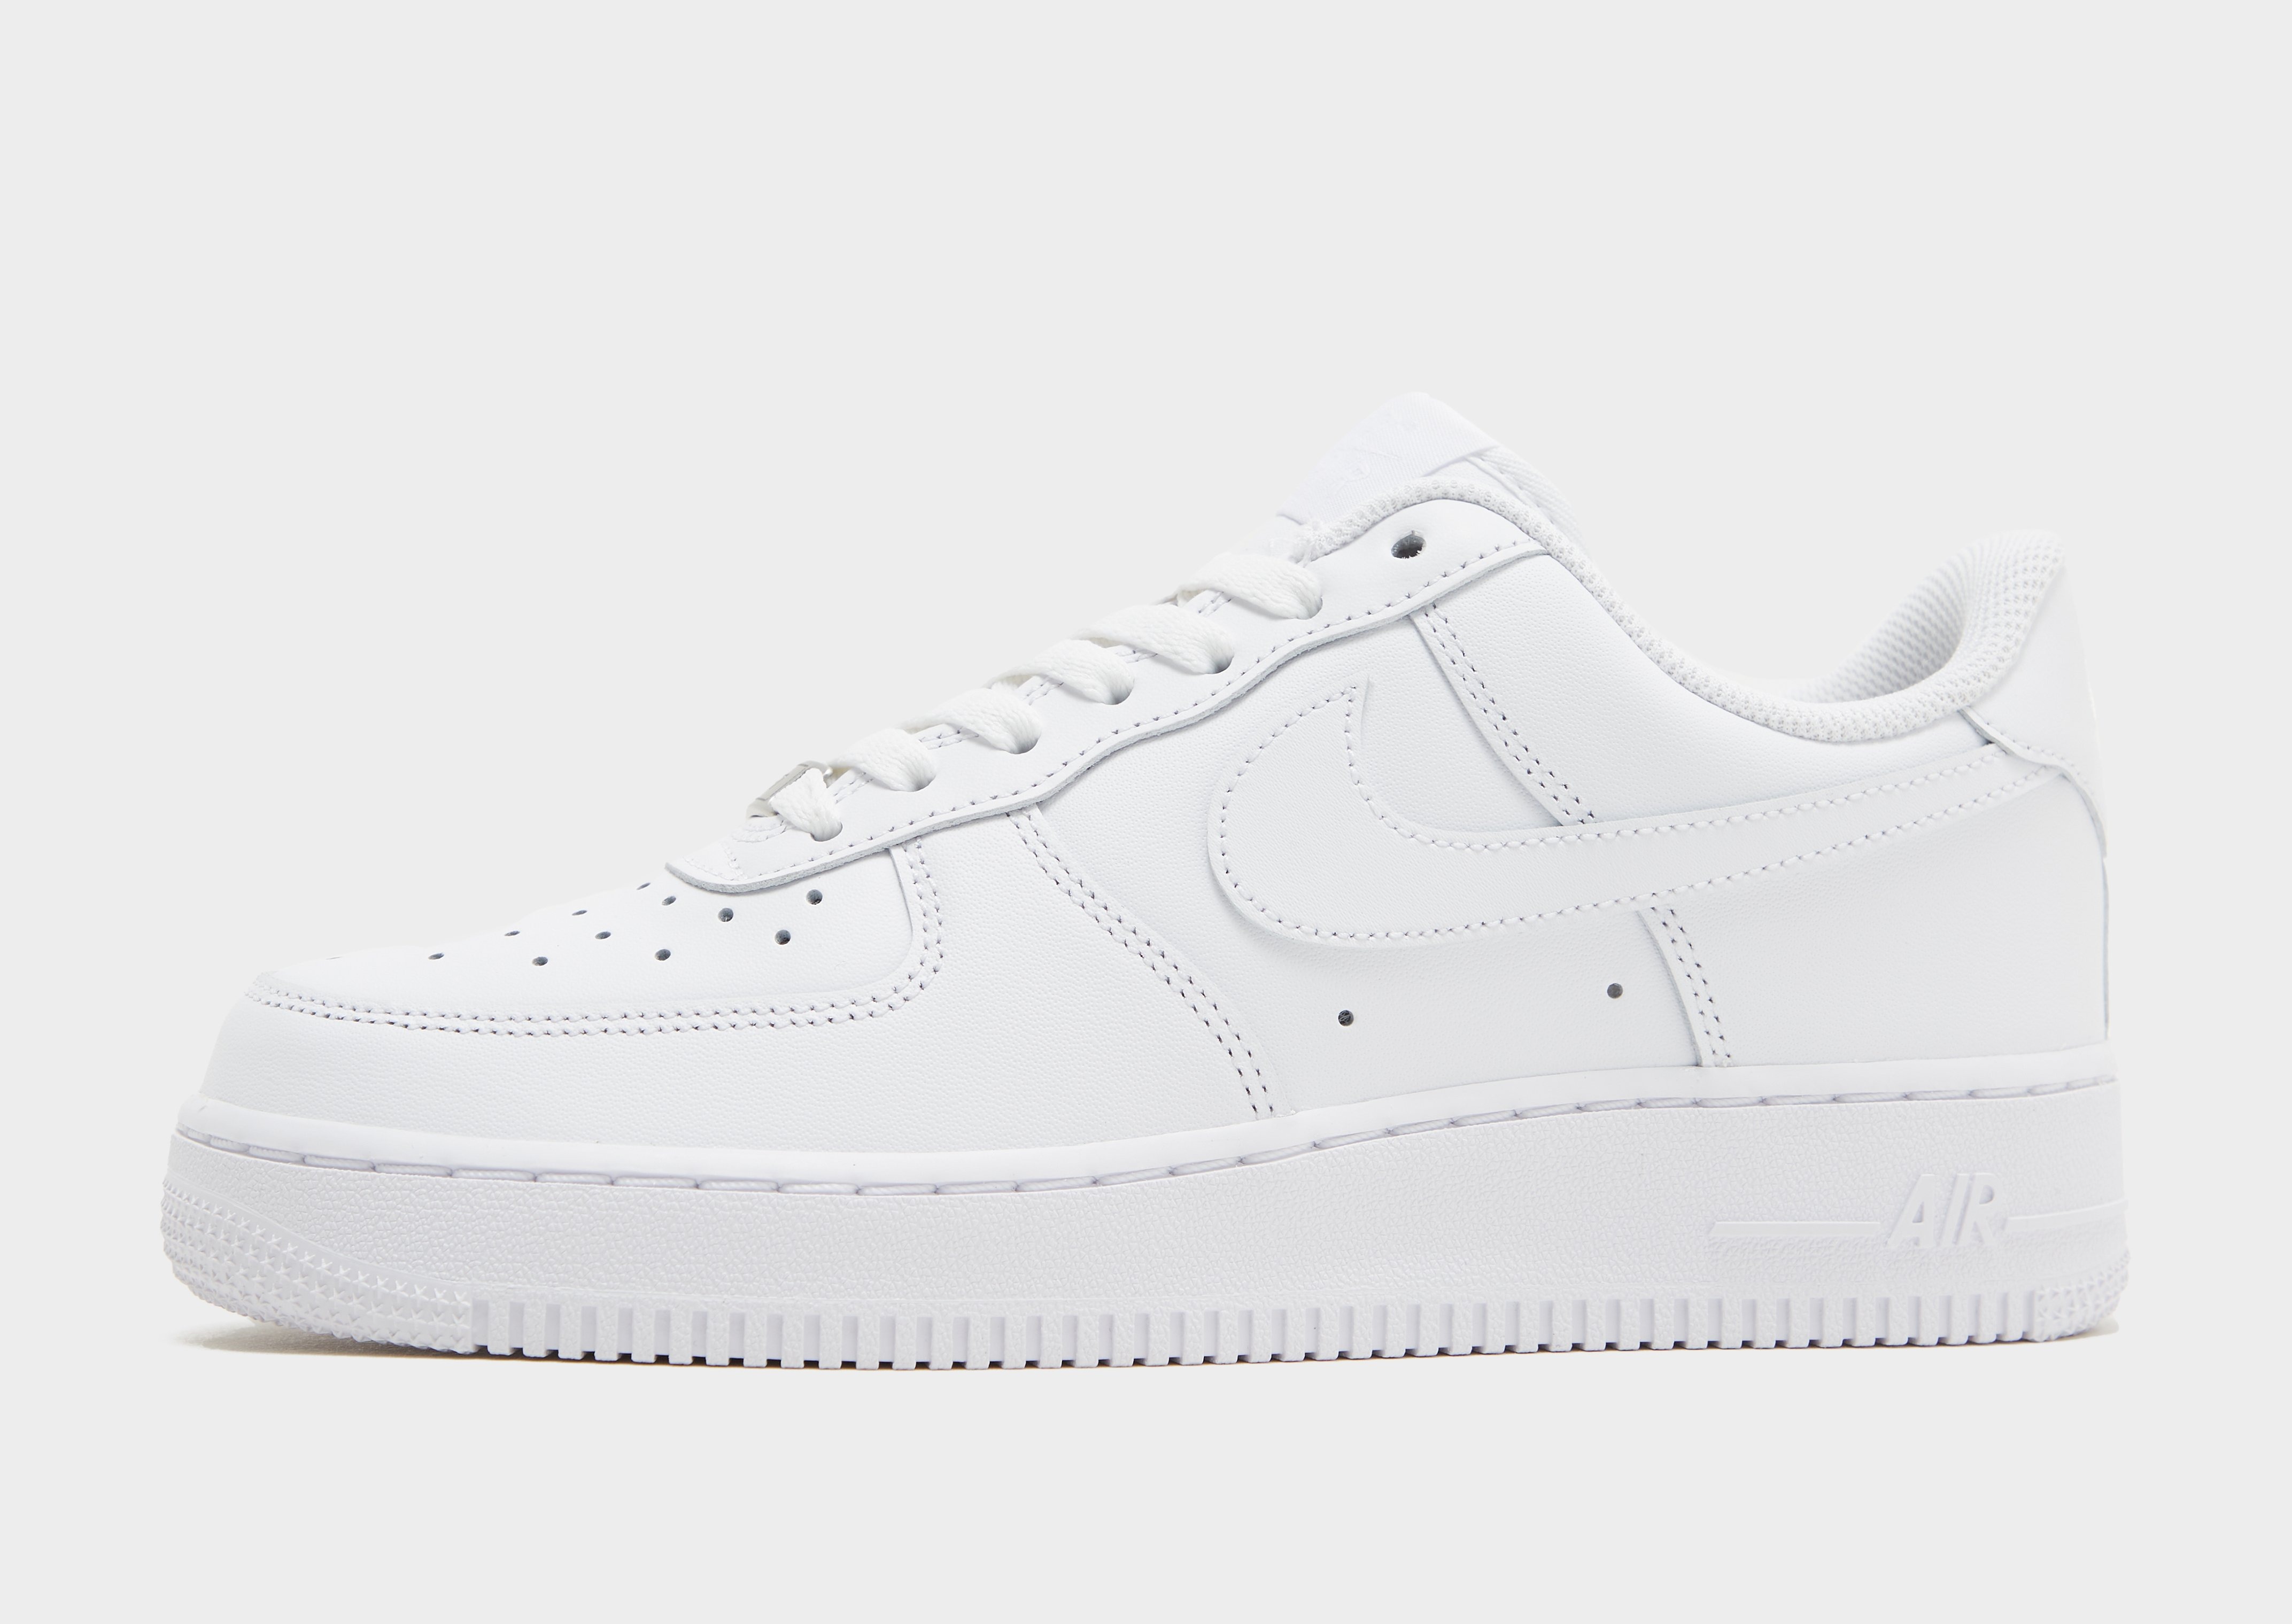 Nike Chaussure Nike Air Force 1 ‘07 pour Homme Blanc- JD Sports France 